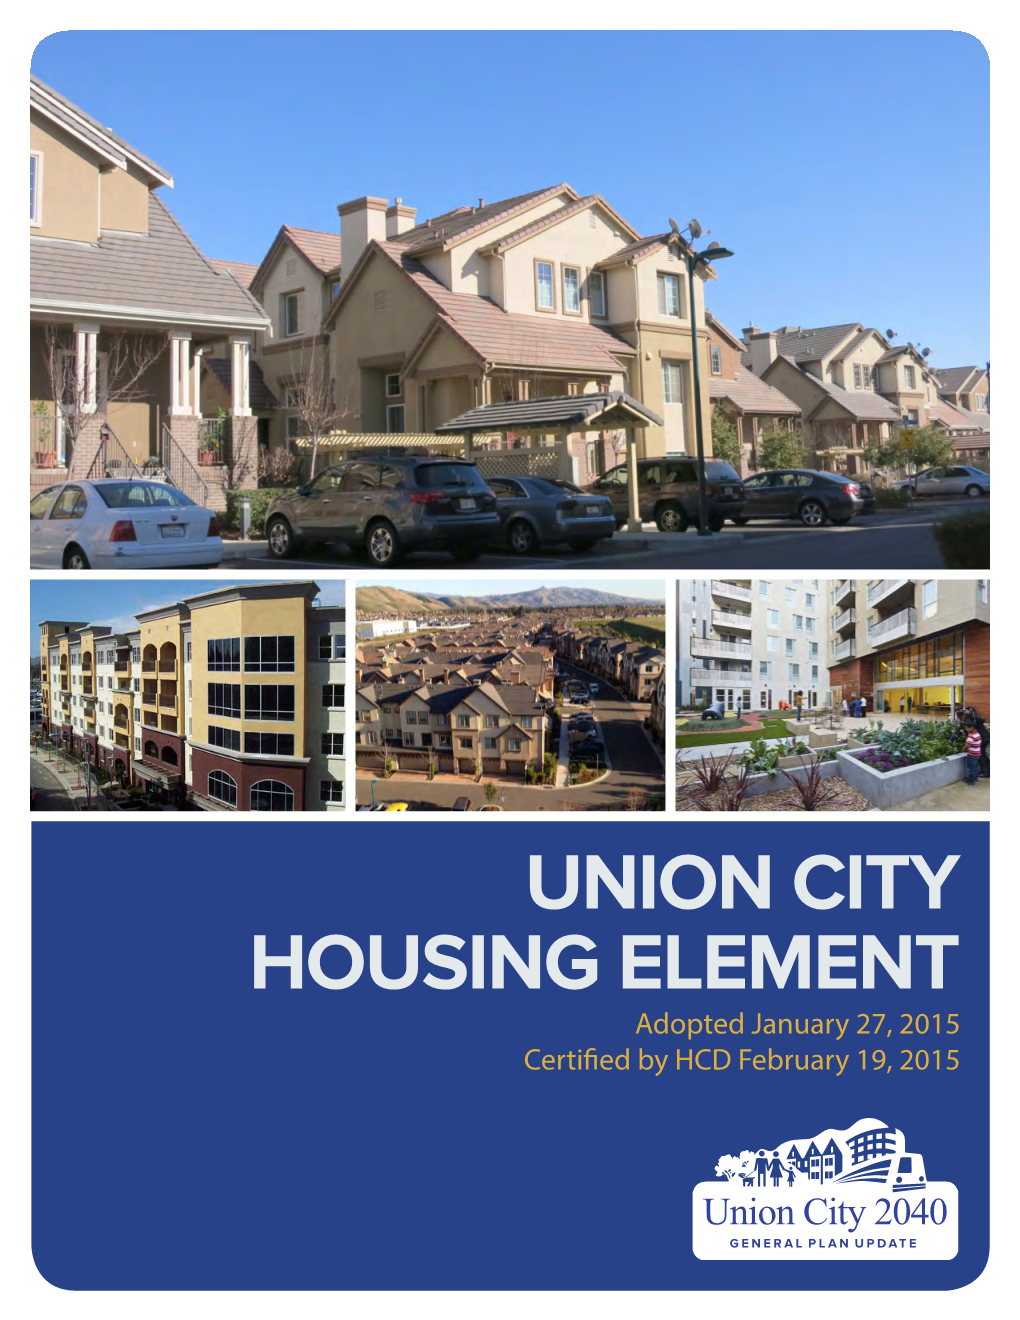 UNION CITY HOUSING ELEMENT Adopted January 27, 2015 Certified by HCD February 19, 2015